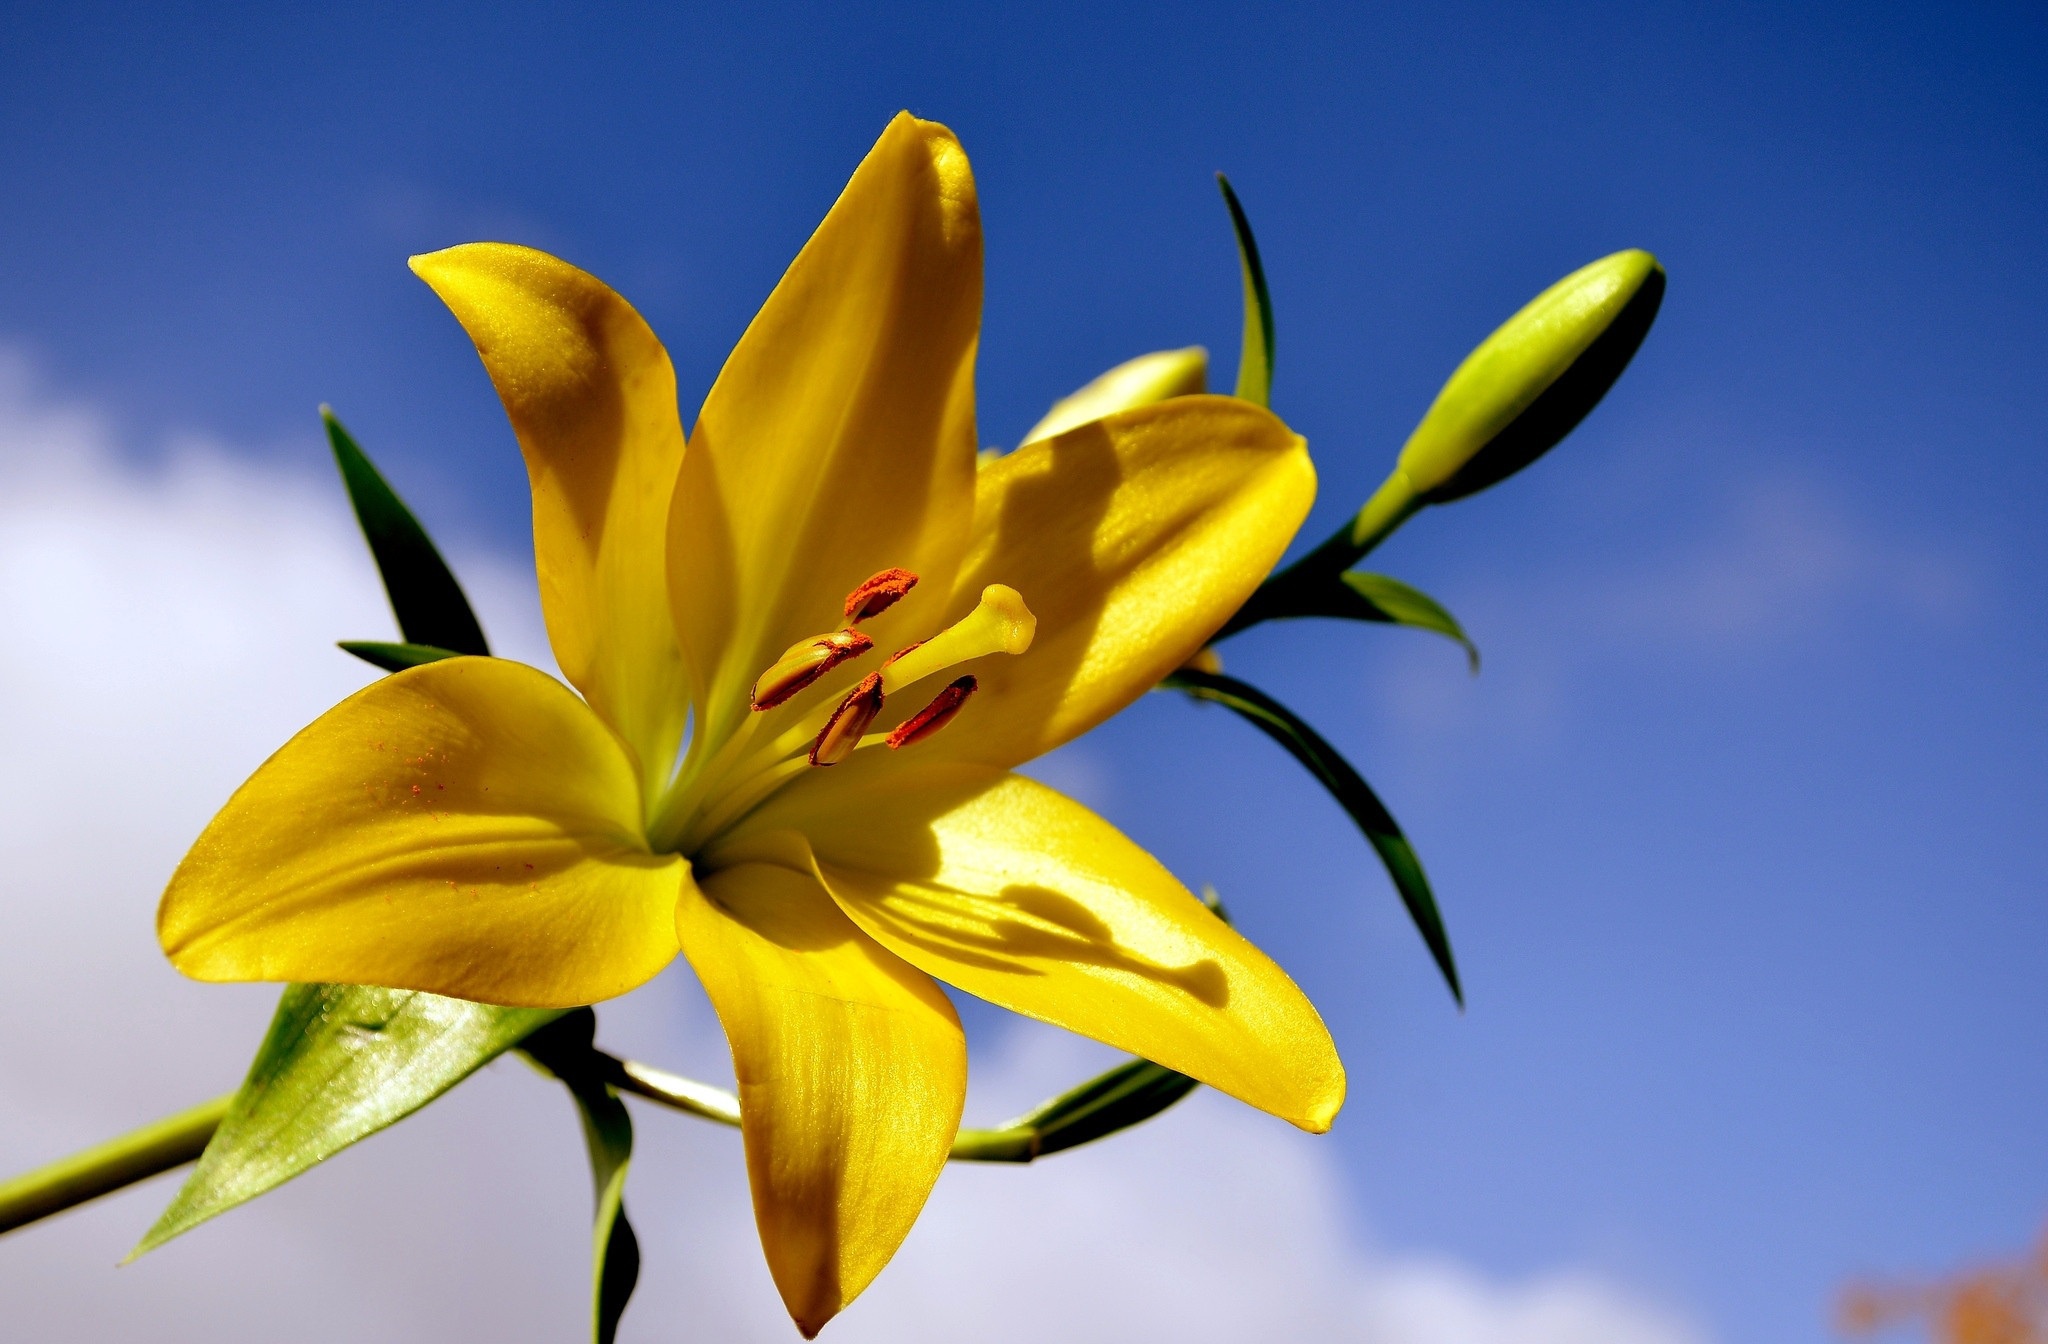 General 2048x1344 plants flowers yellow flowers lilies